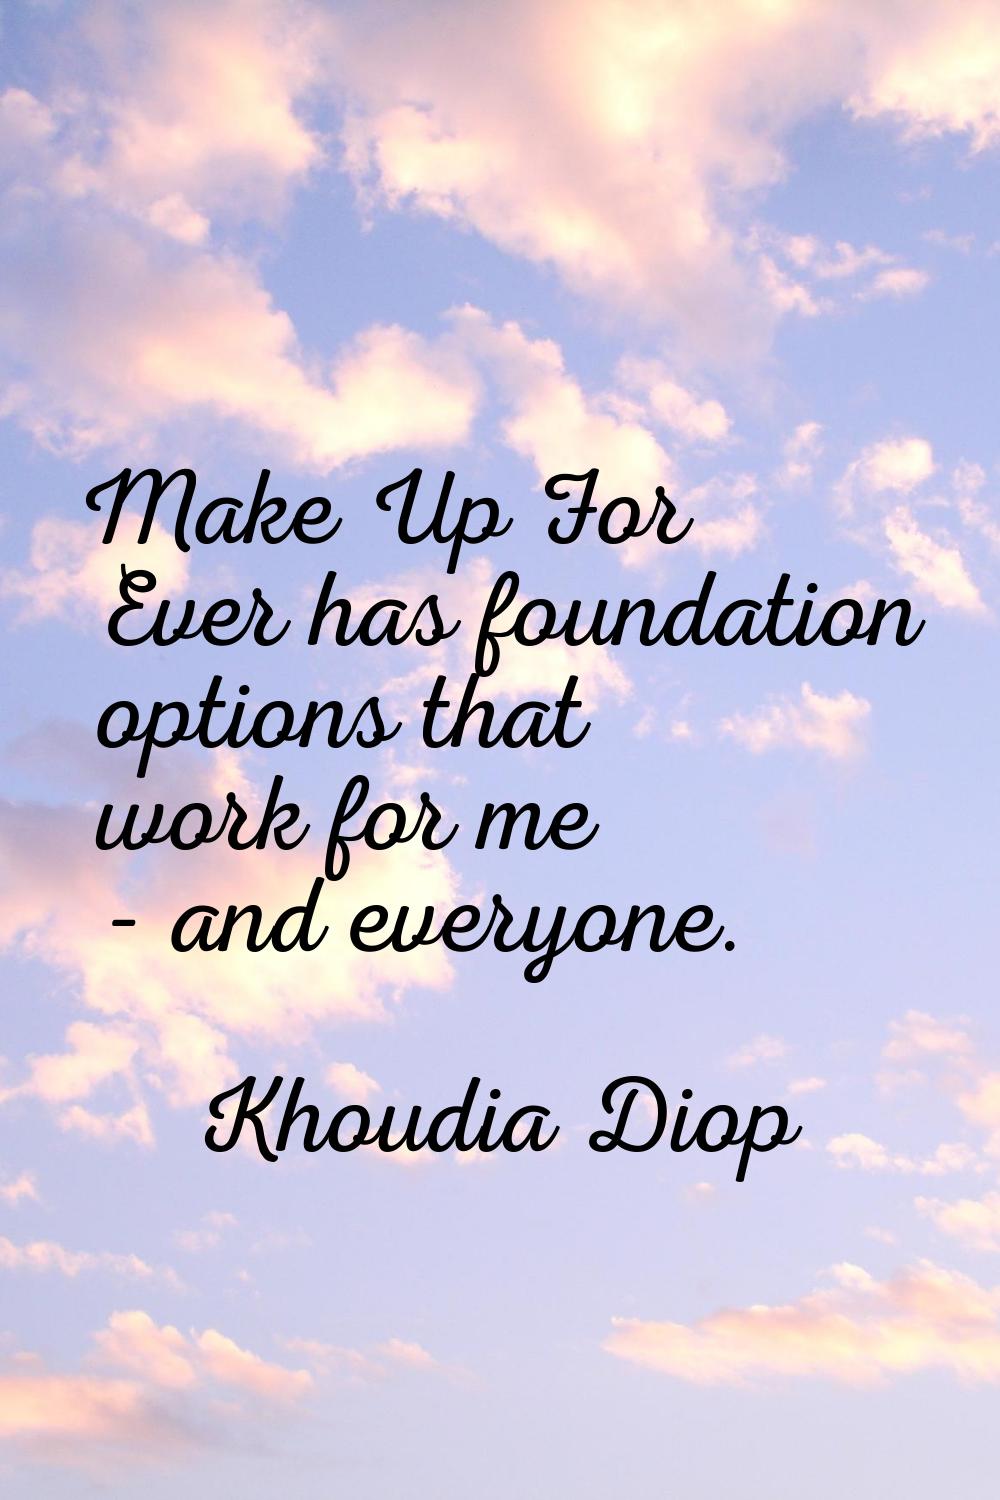 Make Up For Ever has foundation options that work for me - and everyone.